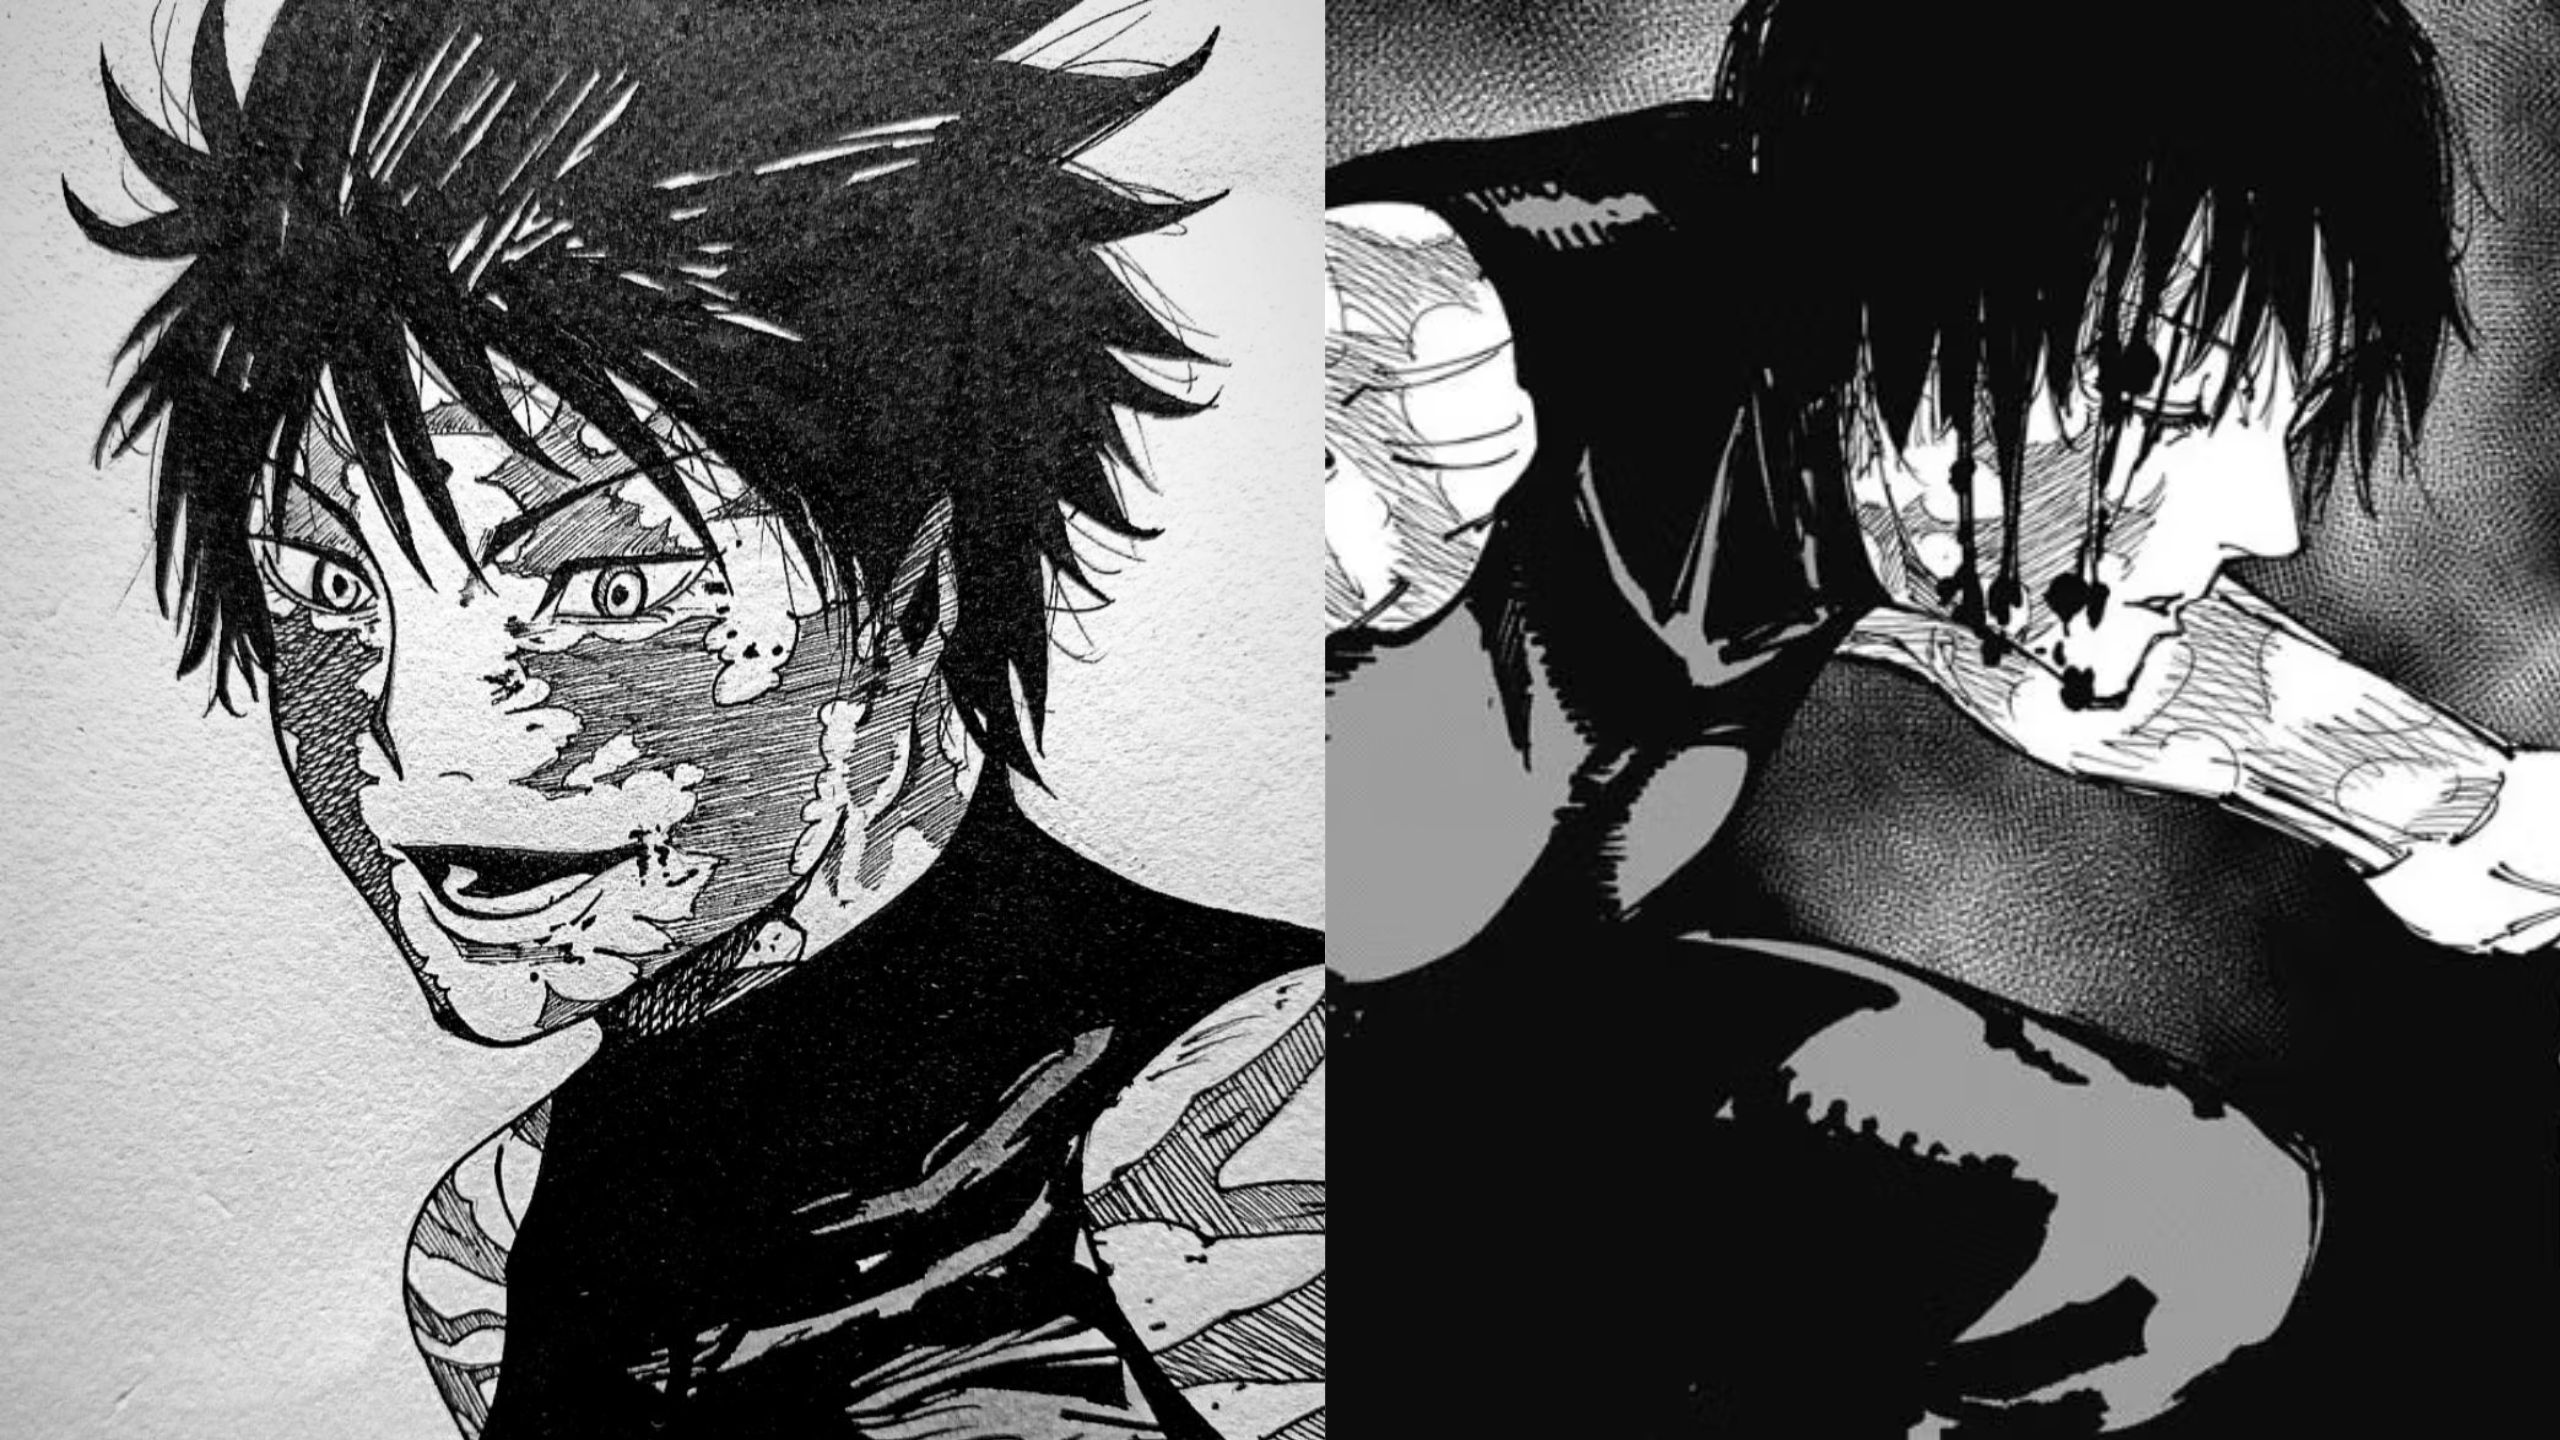 Jujutsu Kaisen: Yuji's Domain Expansion Might Spell Doom for Both Him and Sukuna—Can Maki Alter Their Fate Once More?